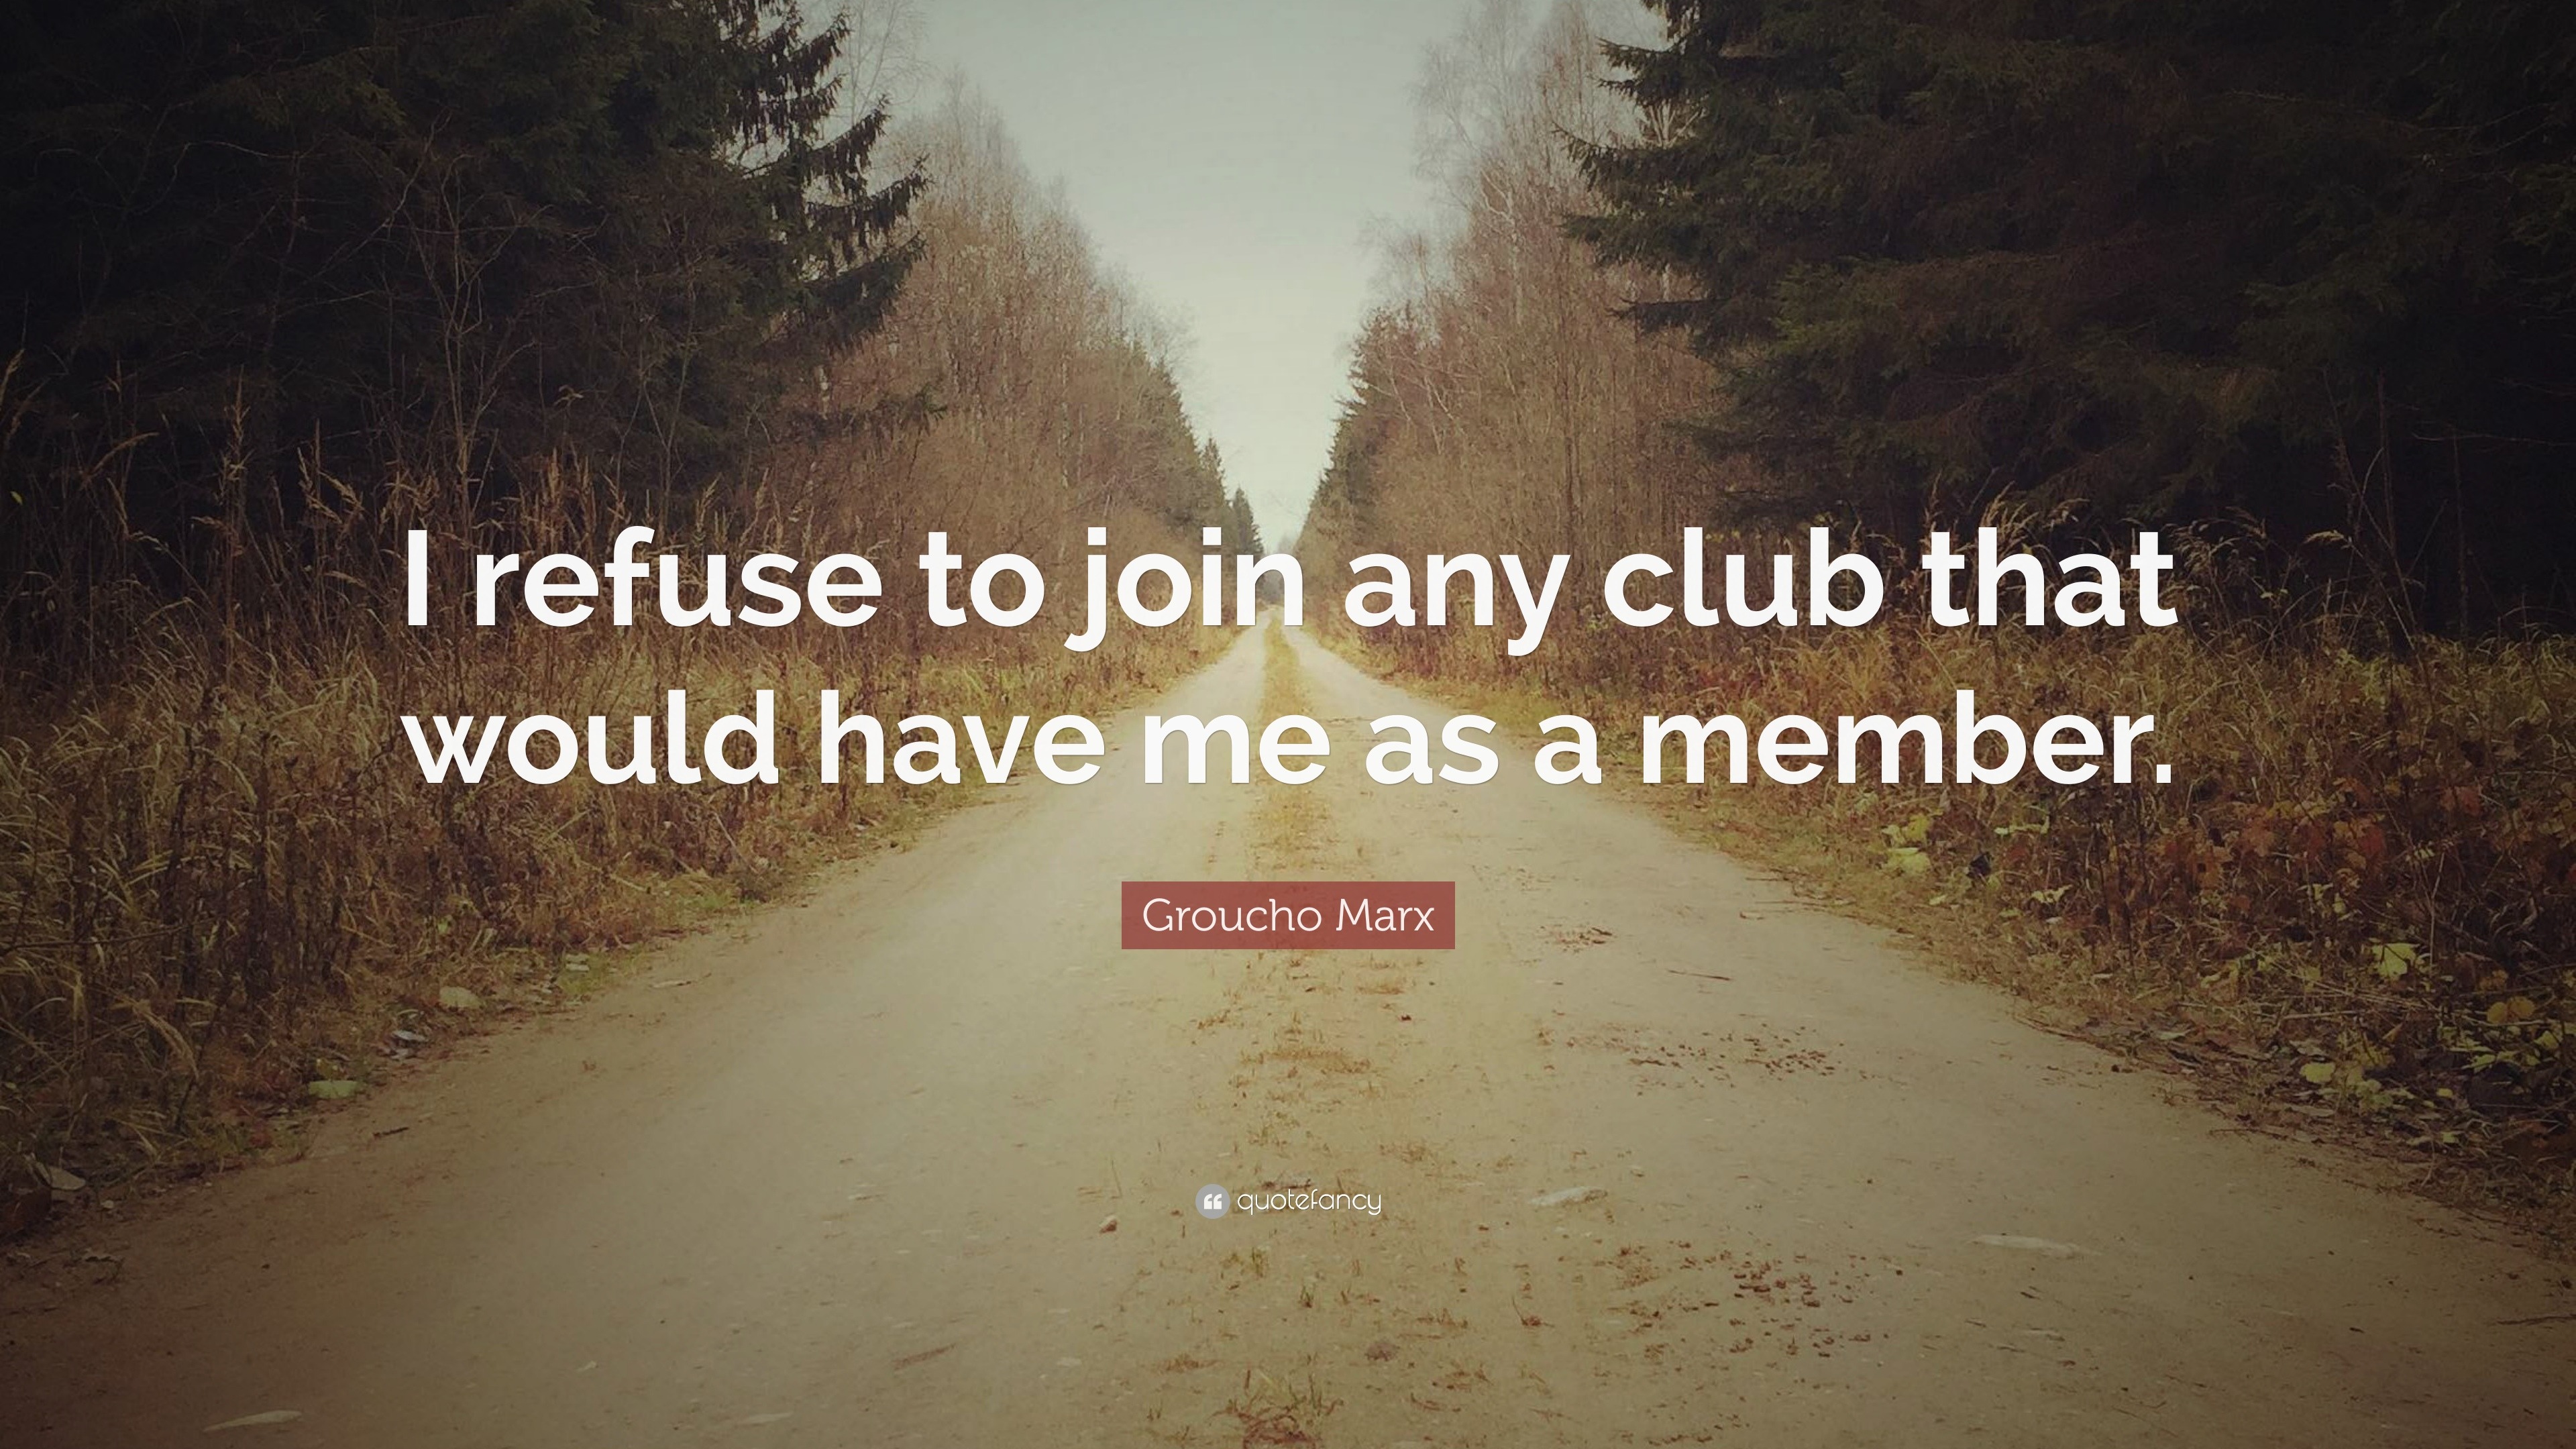 Groucho Marx Quote: “I refuse to join any club that would have me as a  member.”